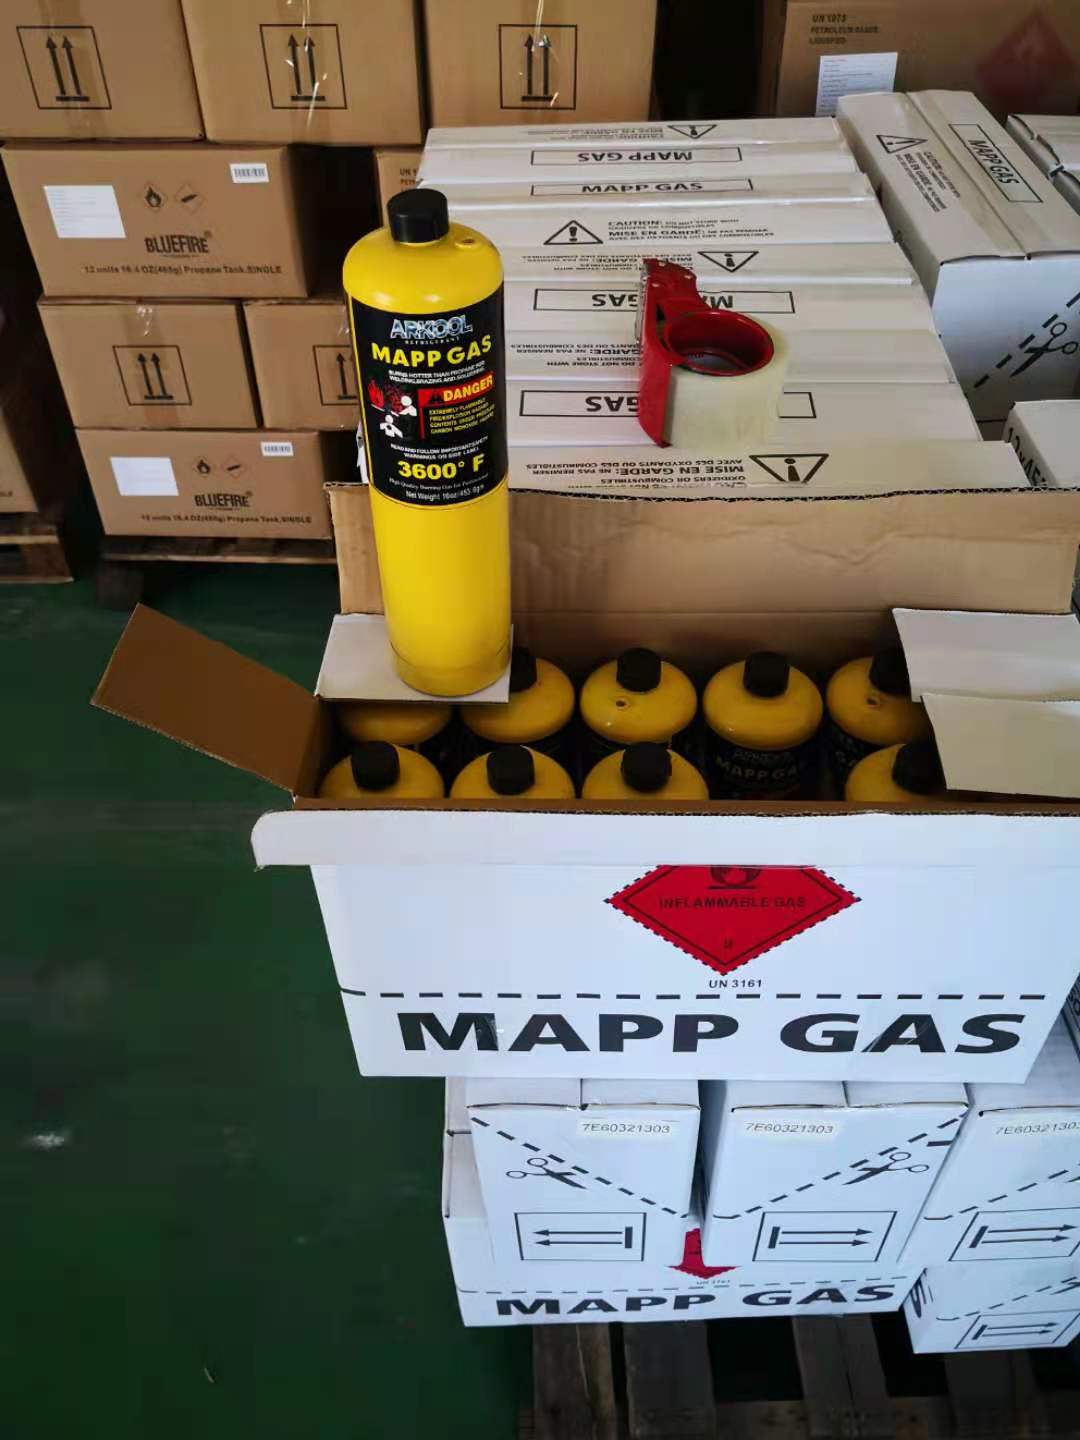 Mixture Of Hydrocarbons Mapp Gas for sale r134a in hydrocarbon